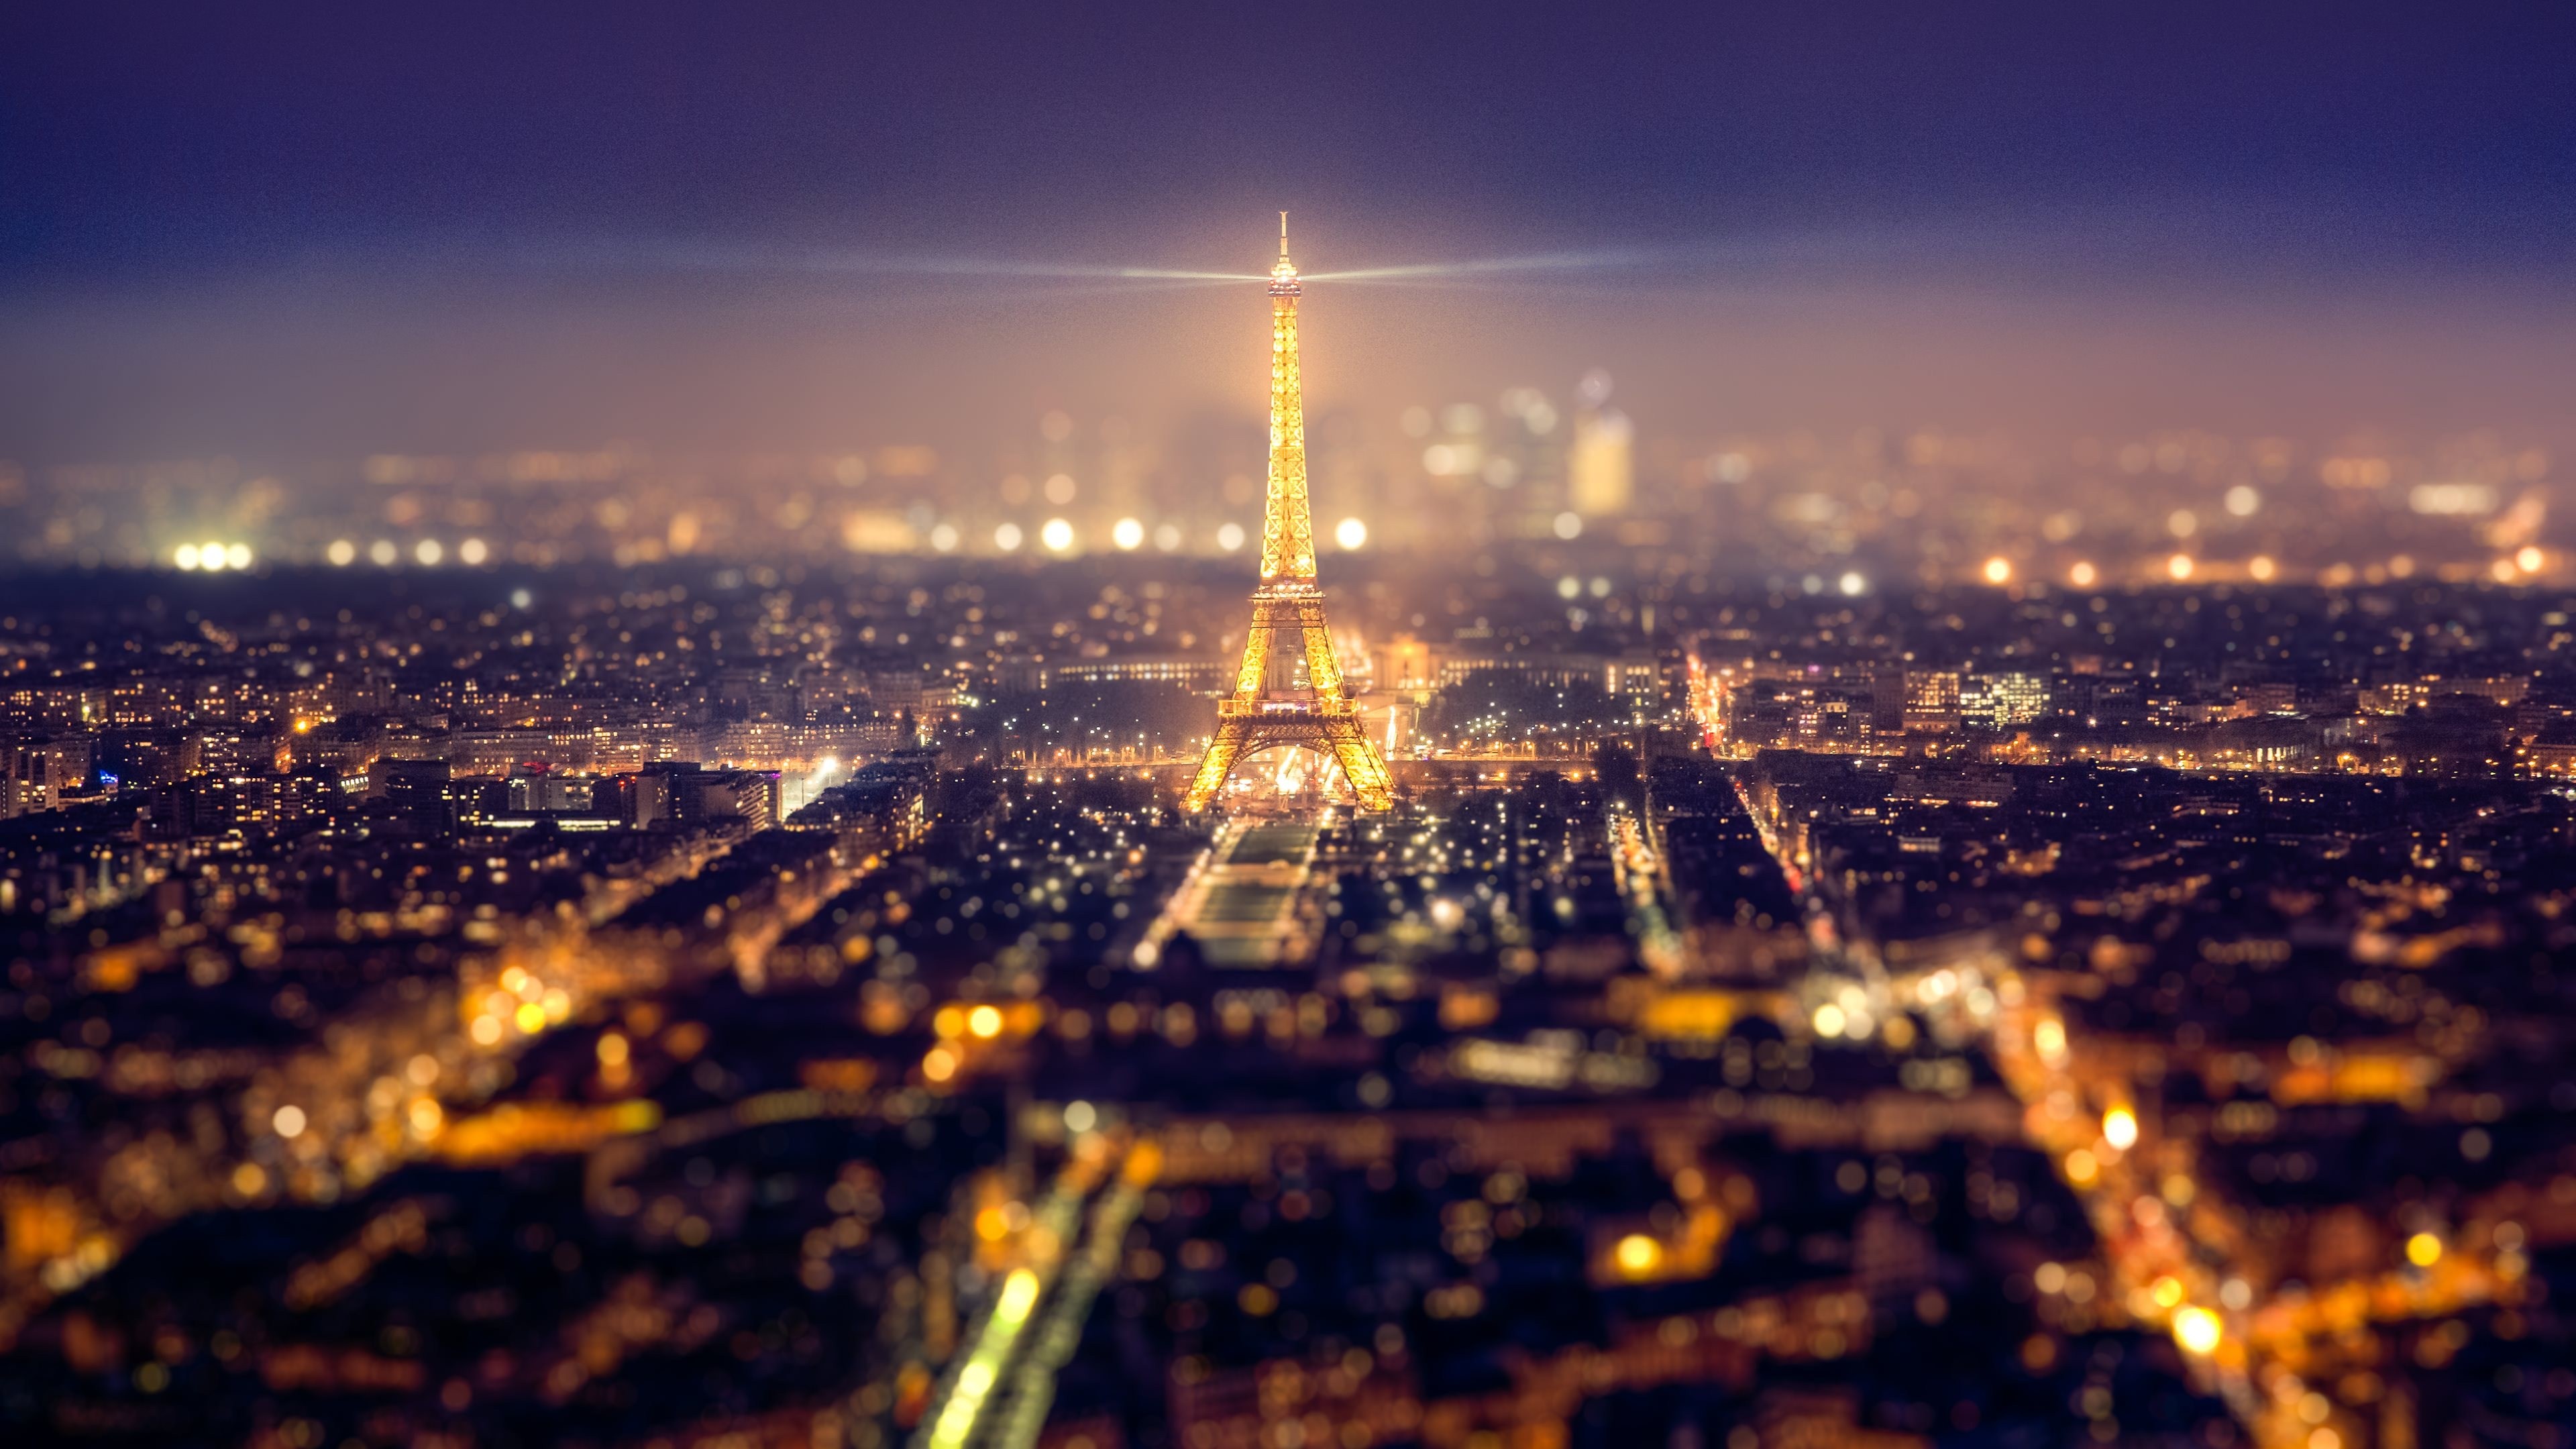 3840x2160 0 Paris Wallpapers High Quality Download Free Paris Wallpapers